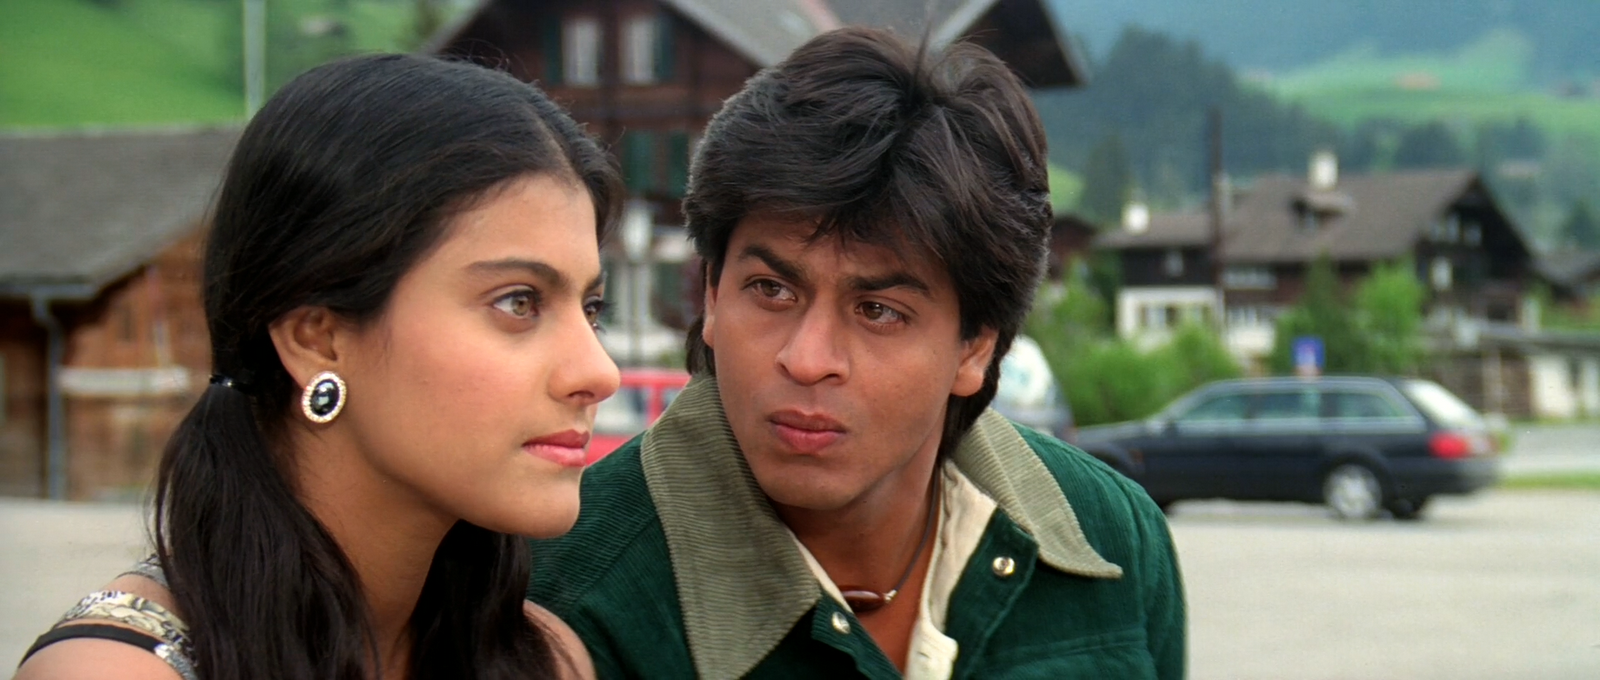 dilwale dulhania le jayenge full movie hd 1080p watch online